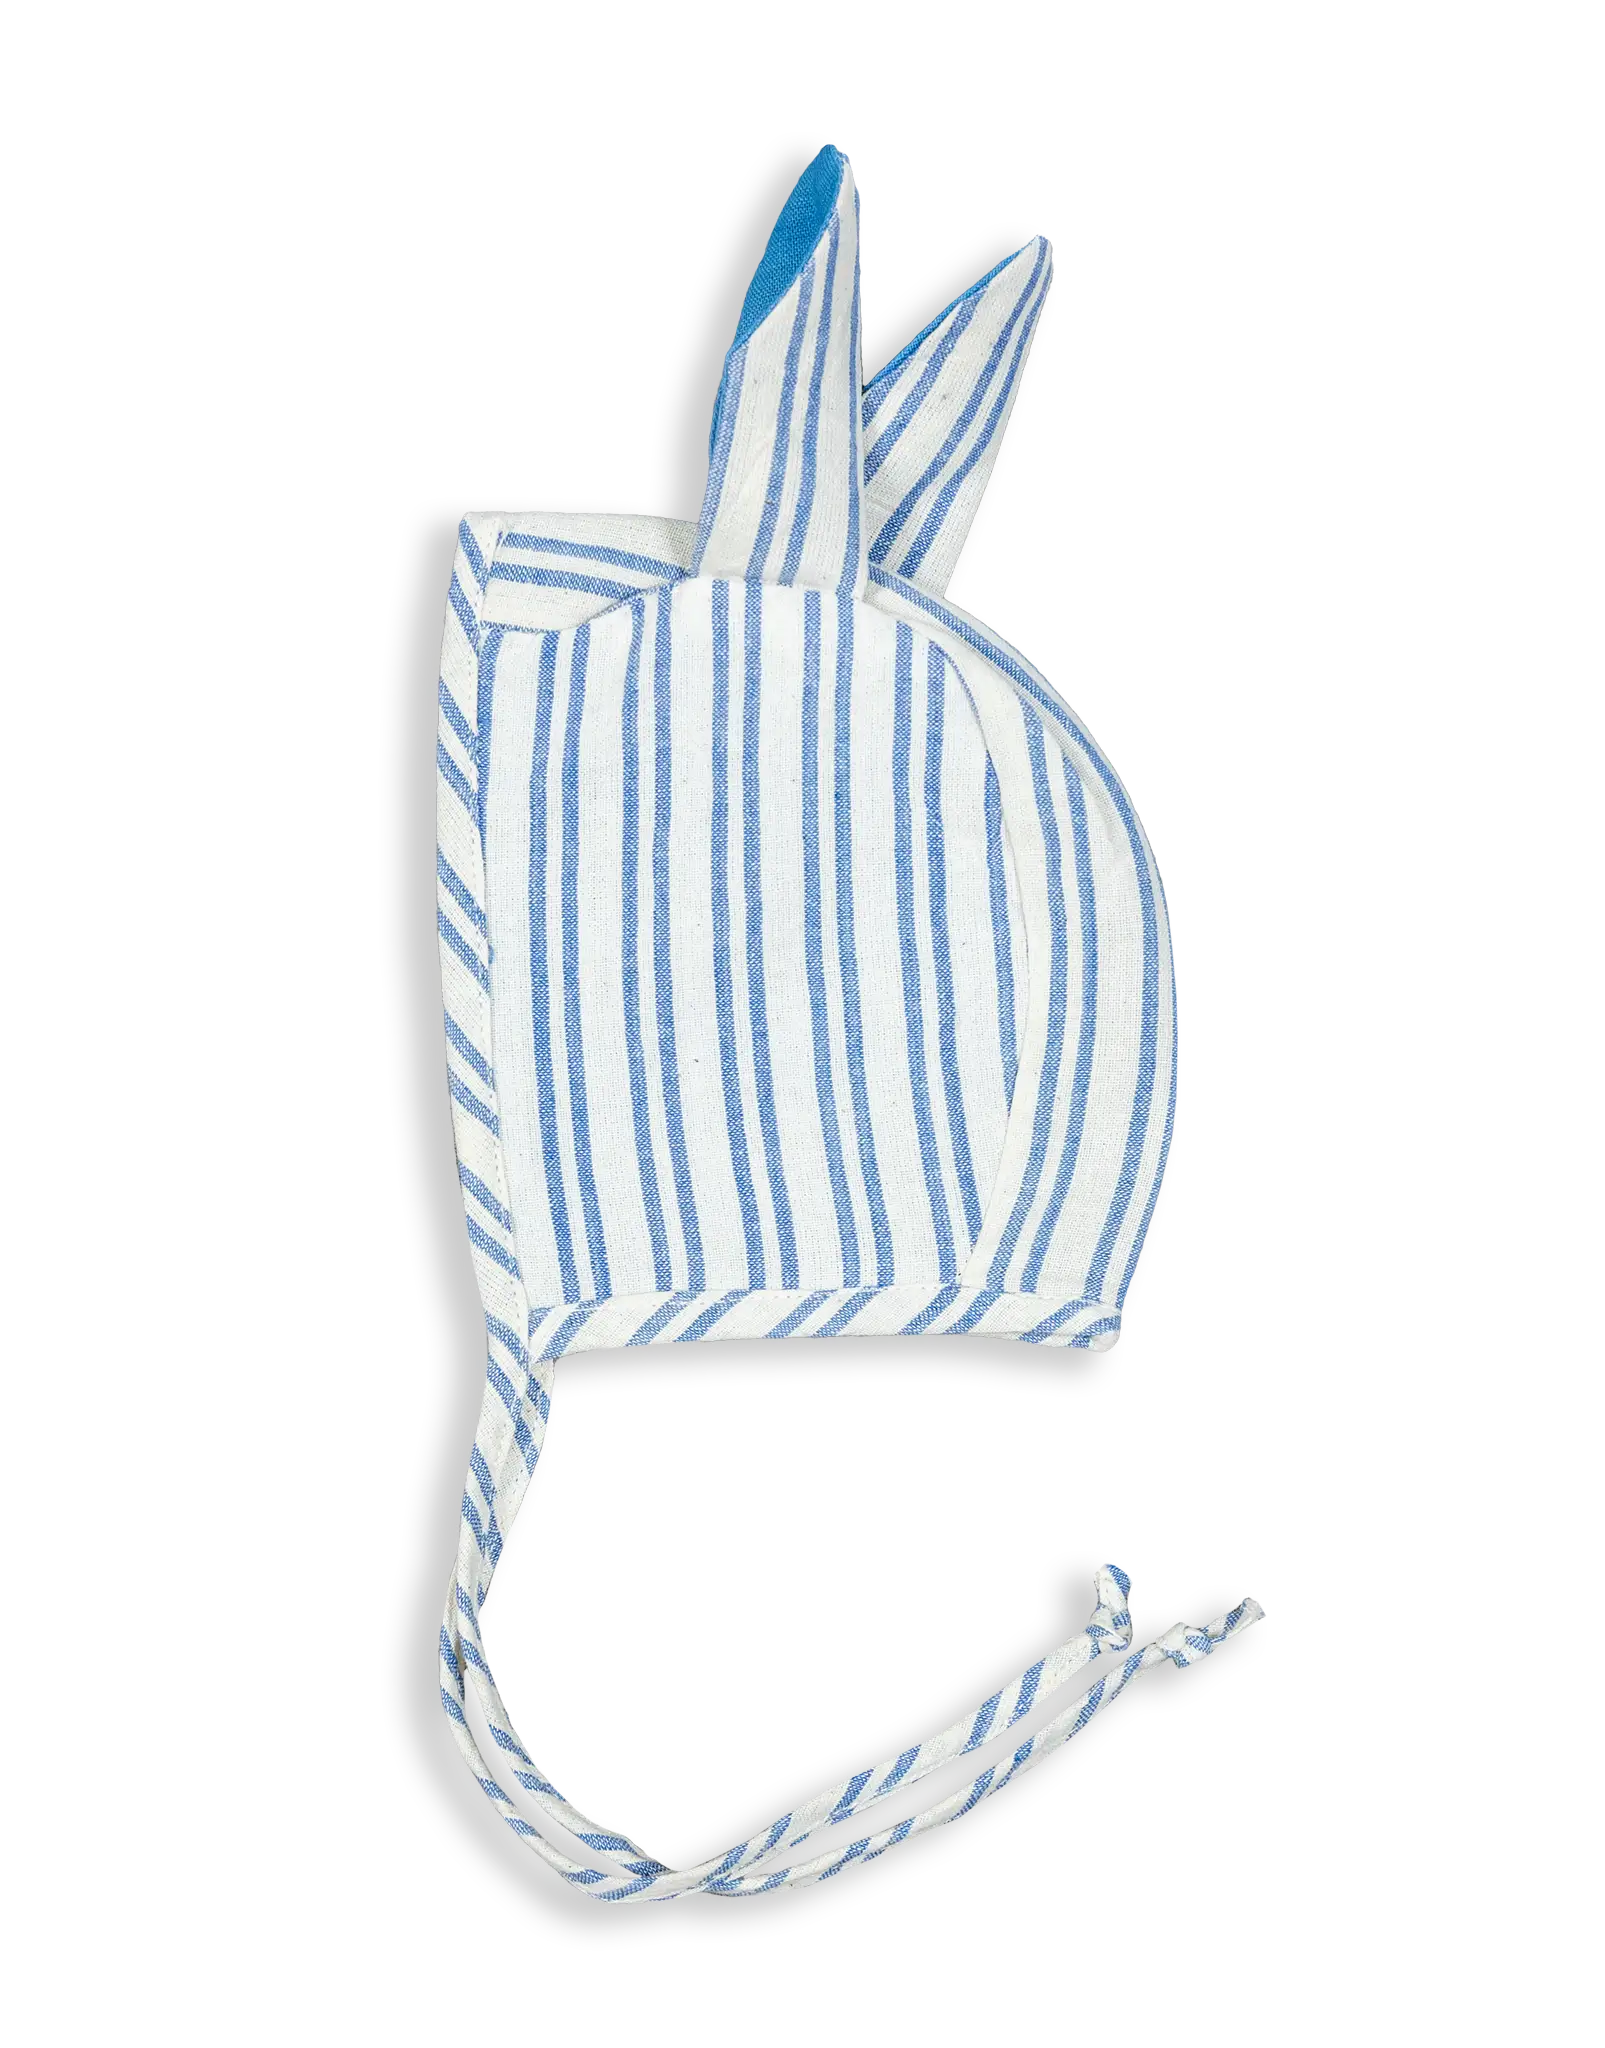 This Bonnet comes in different designs like Bear ears. Our signature striped woven cotton is lined with plain-woven fabric in either blue or pink shades.